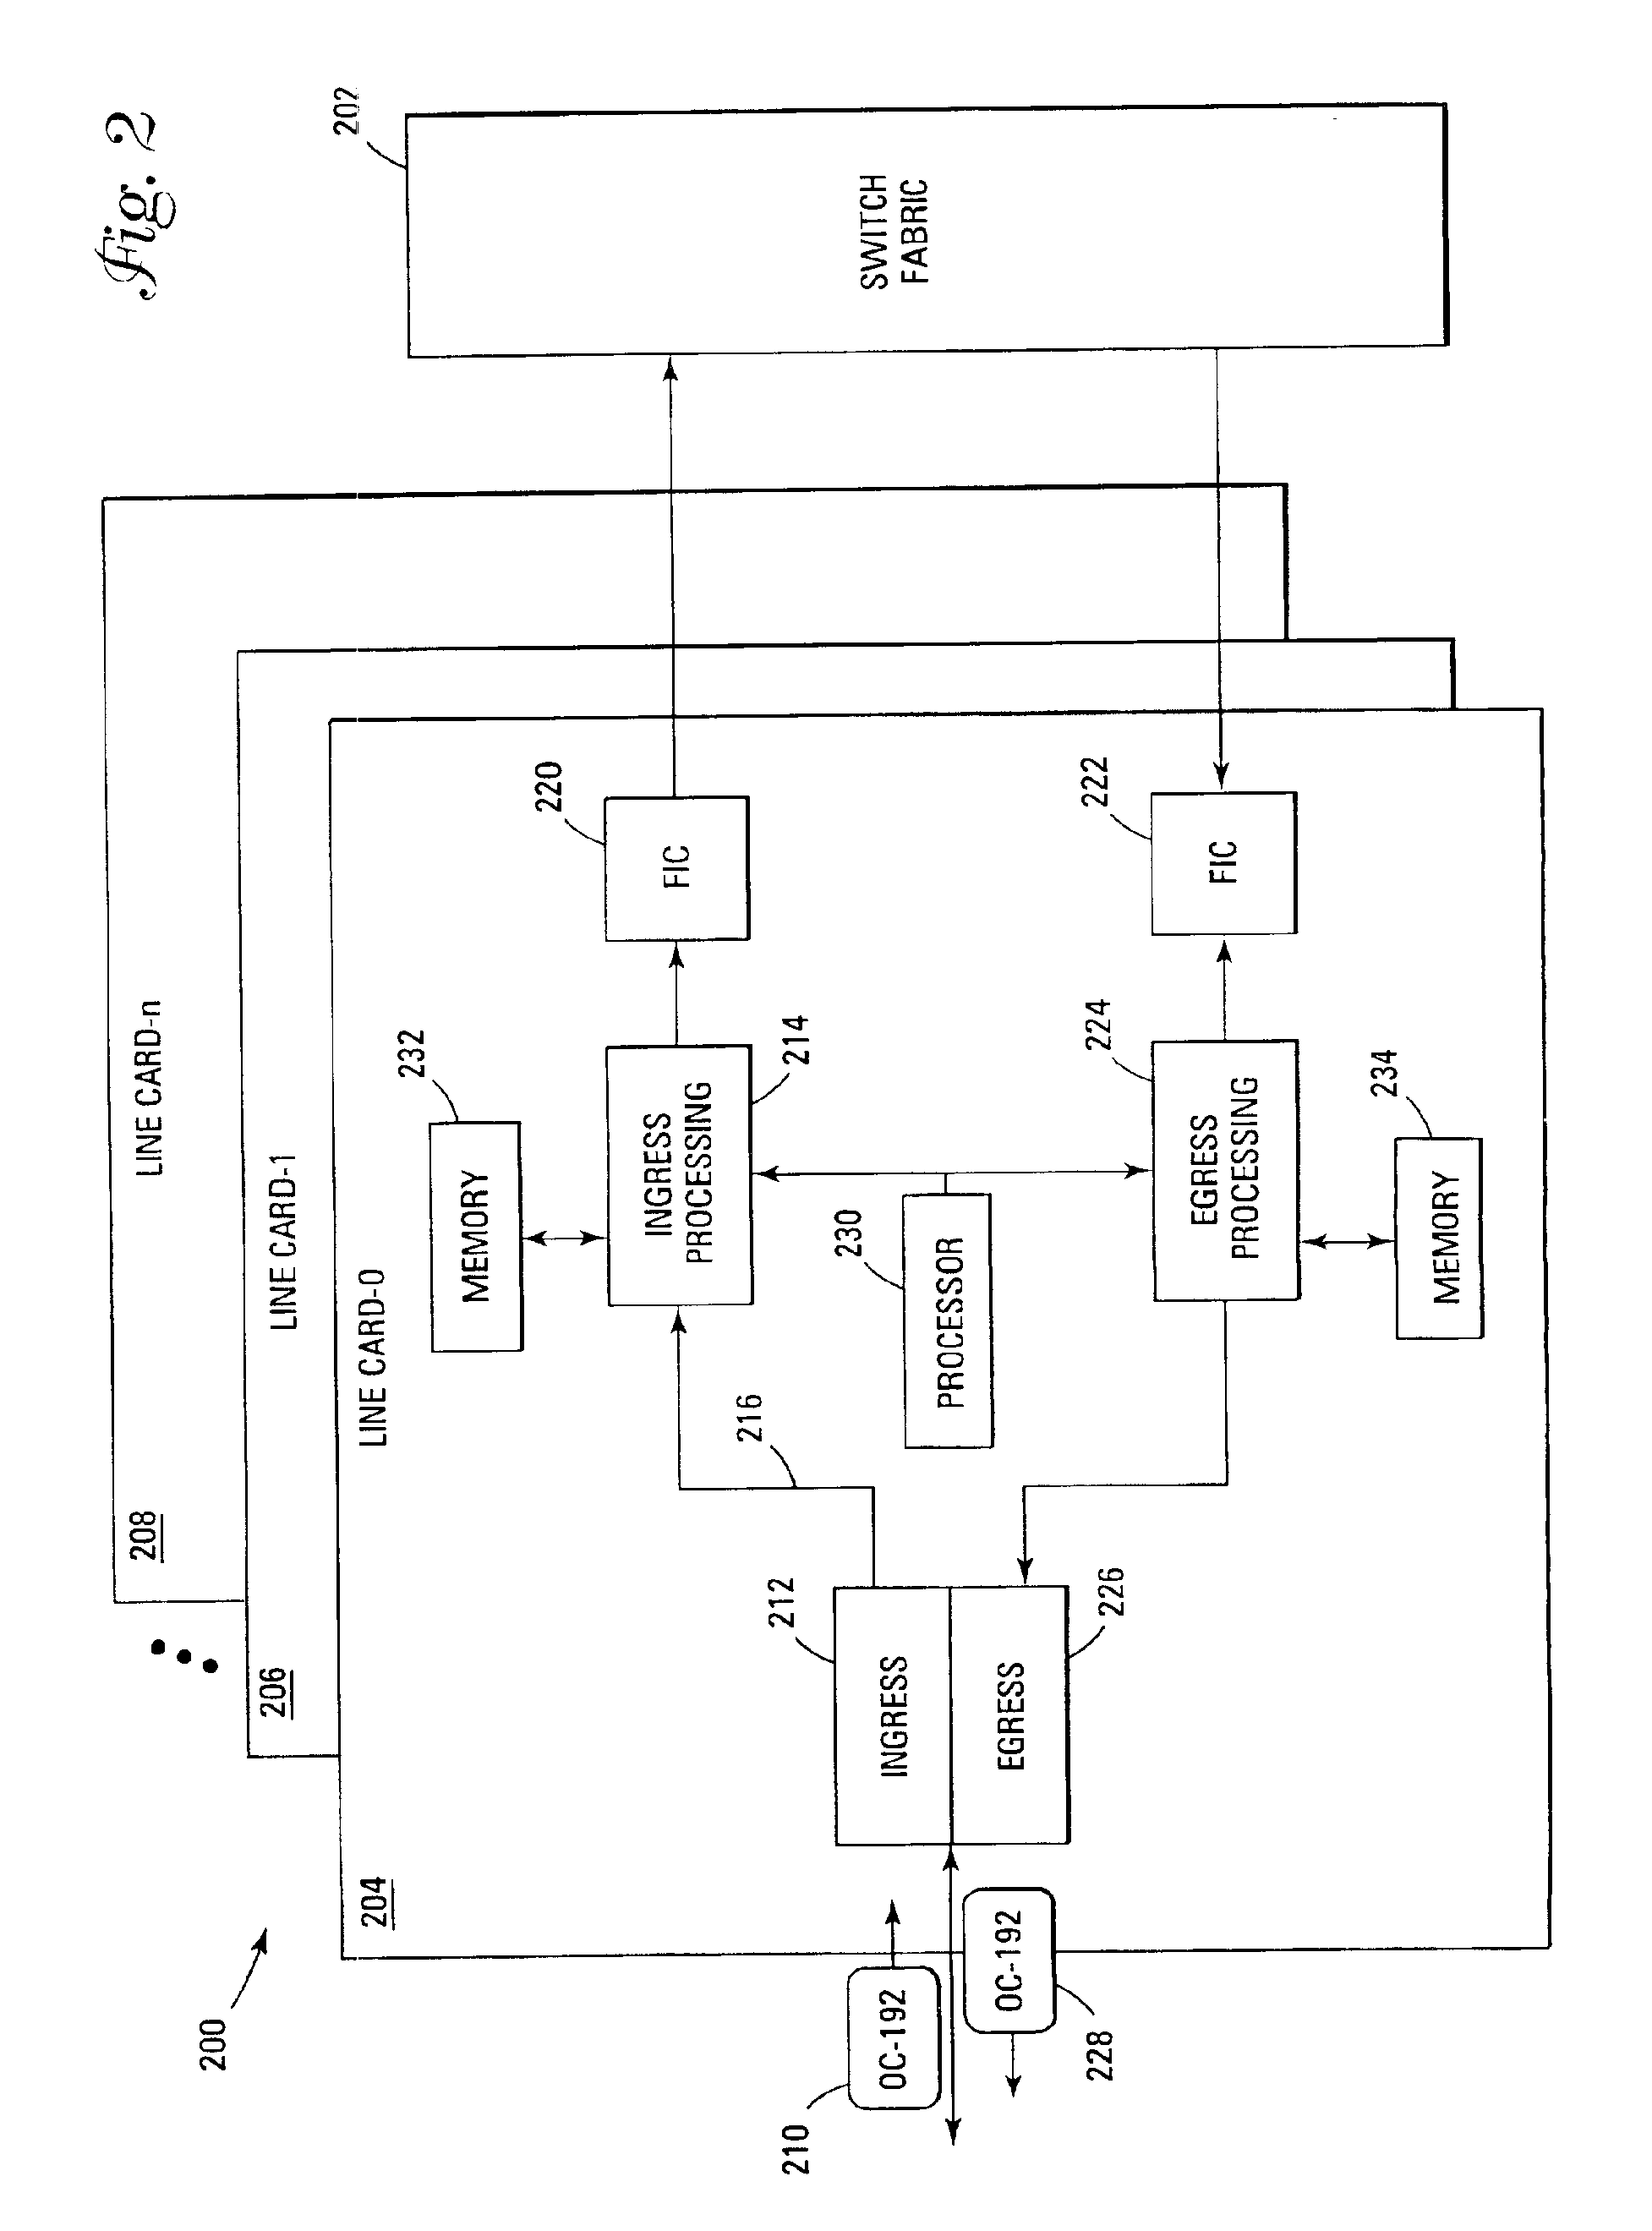 System and method for hierarchical policing of flows and subflows of a data stream